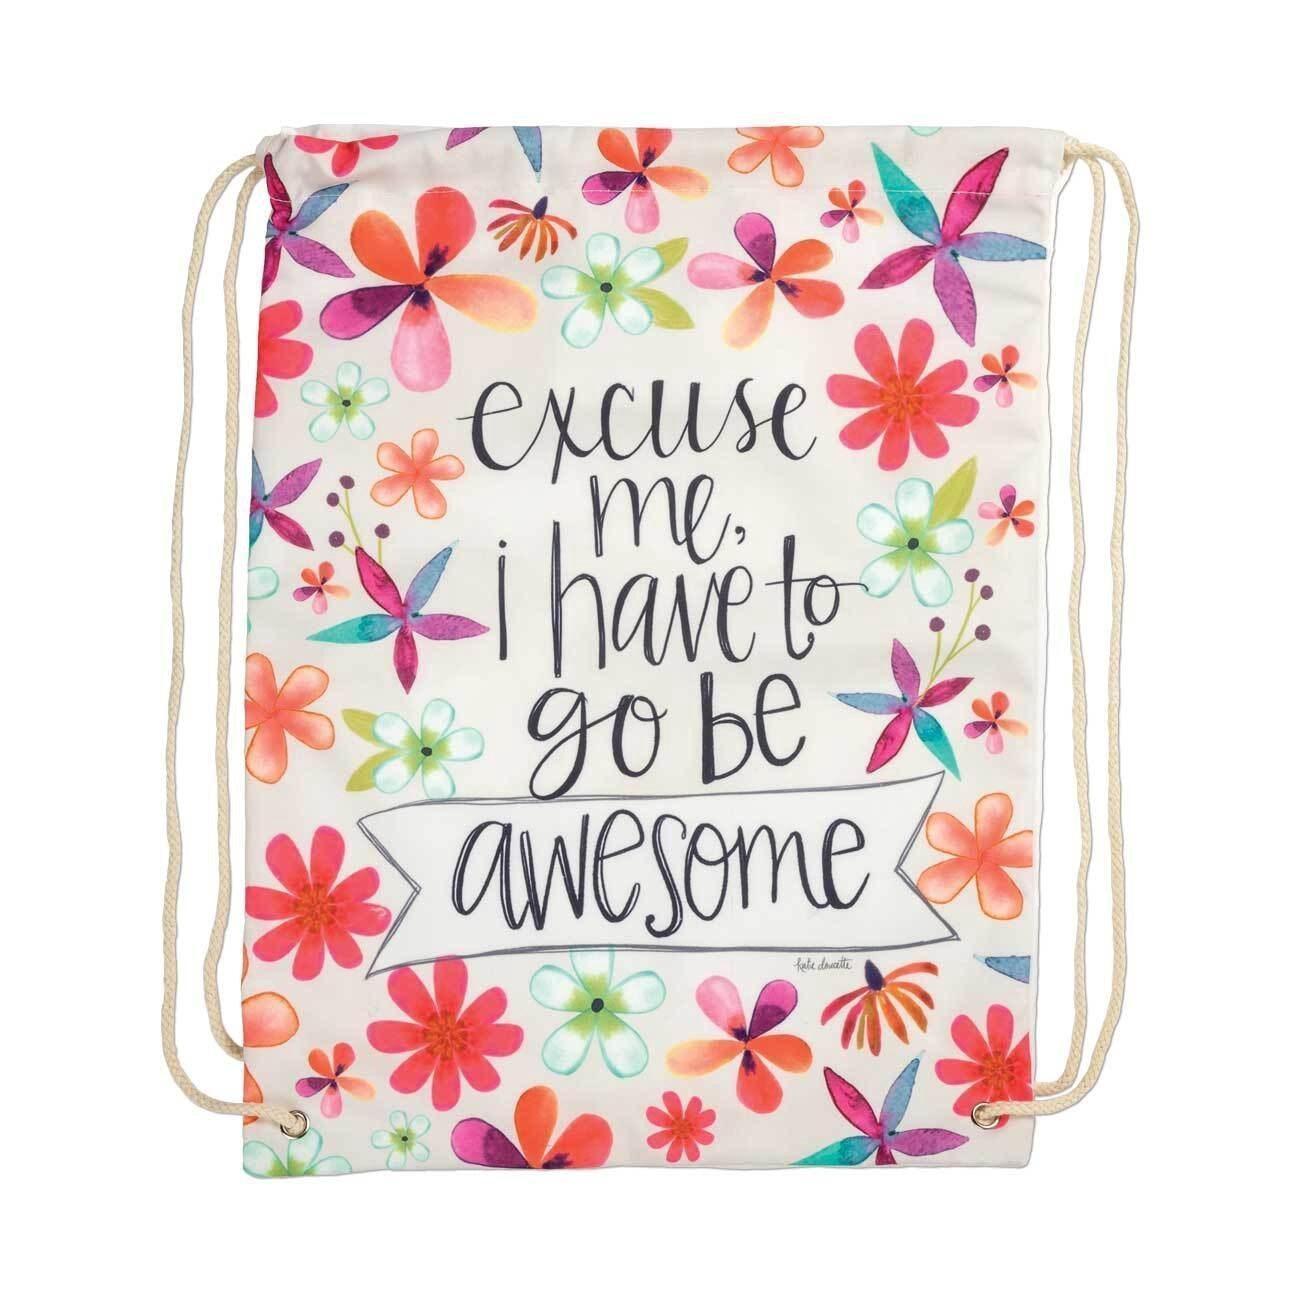 Go Be Awesome Drawstring Bkpk - Sunshine and Grace Gifts